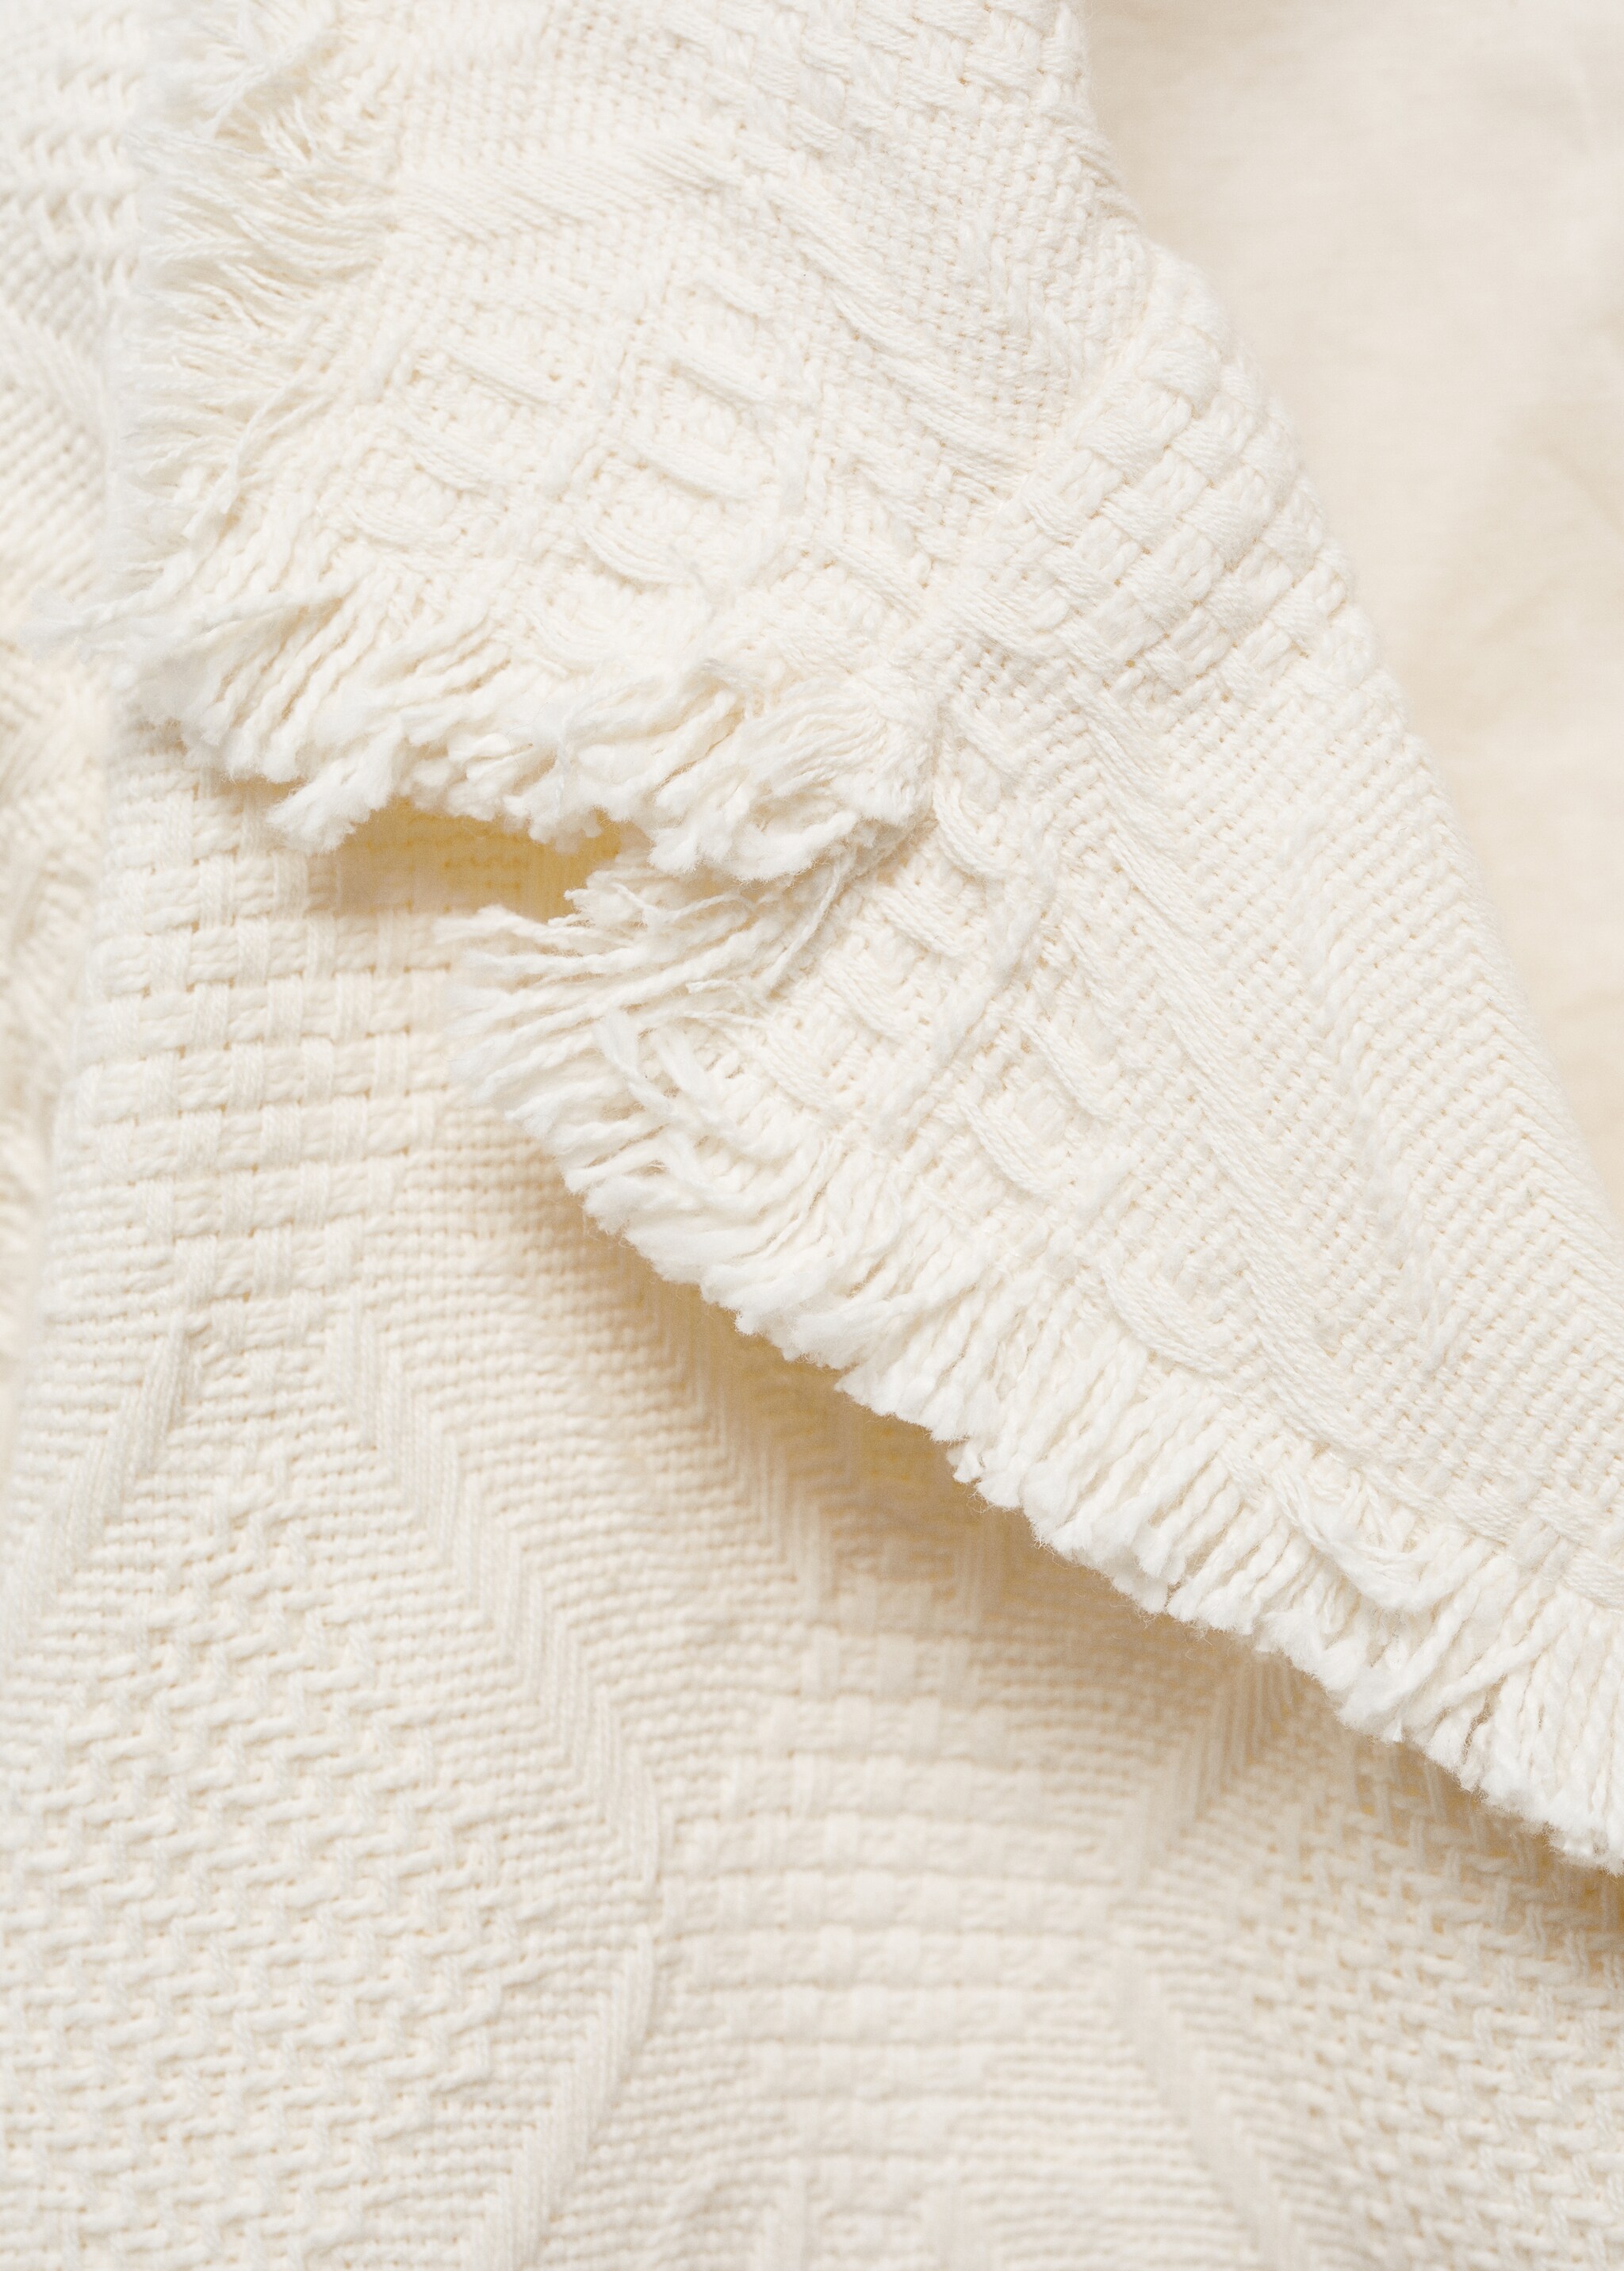 Fringed textured jacket - Details of the article 8